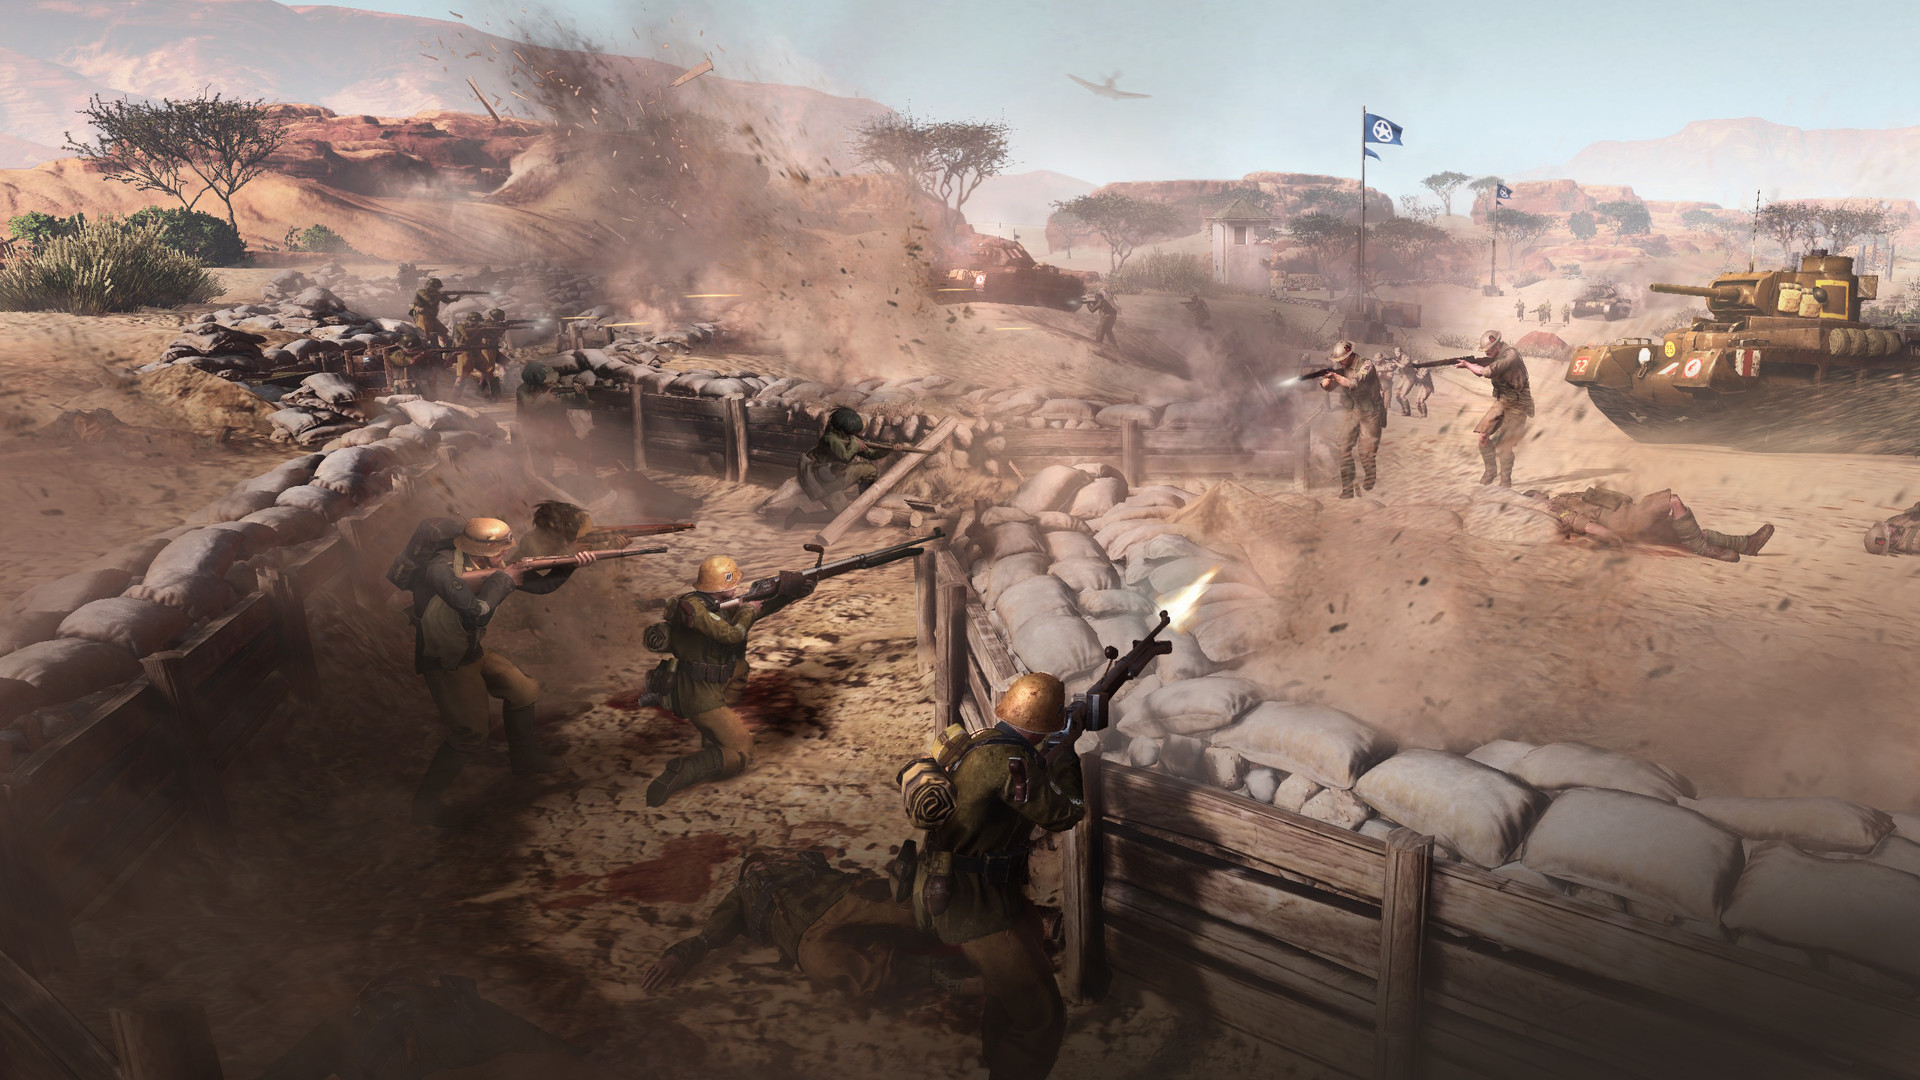 Company of Heroes 3 factions explained